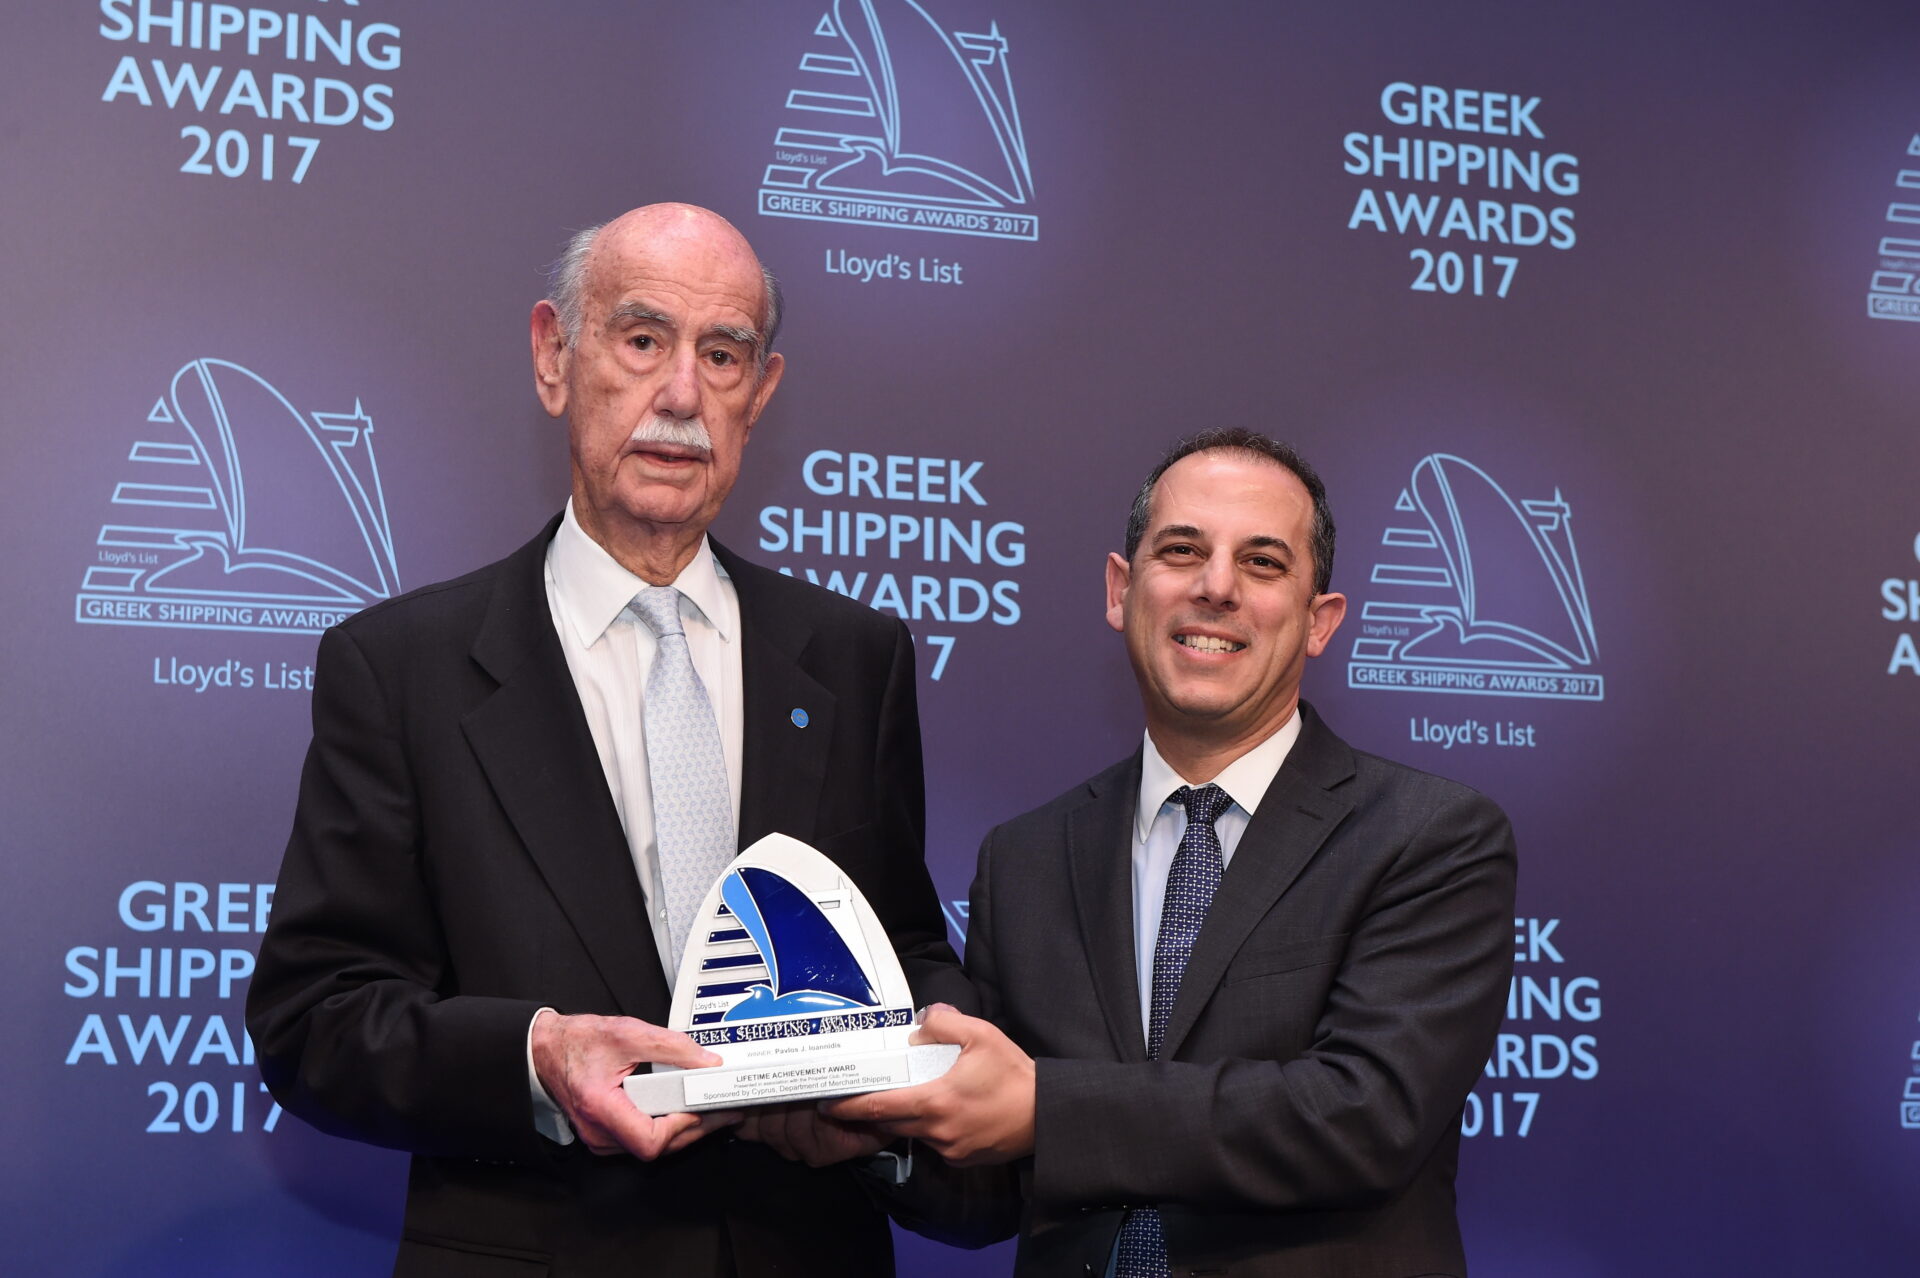 Pavlos J. Ioannidis receiving the Lloyd’s List/Propeller Club Lifetime Achievement Award from Marios Demetriades, Minister of Transport, Communications and Works, Republic of Cyprus.